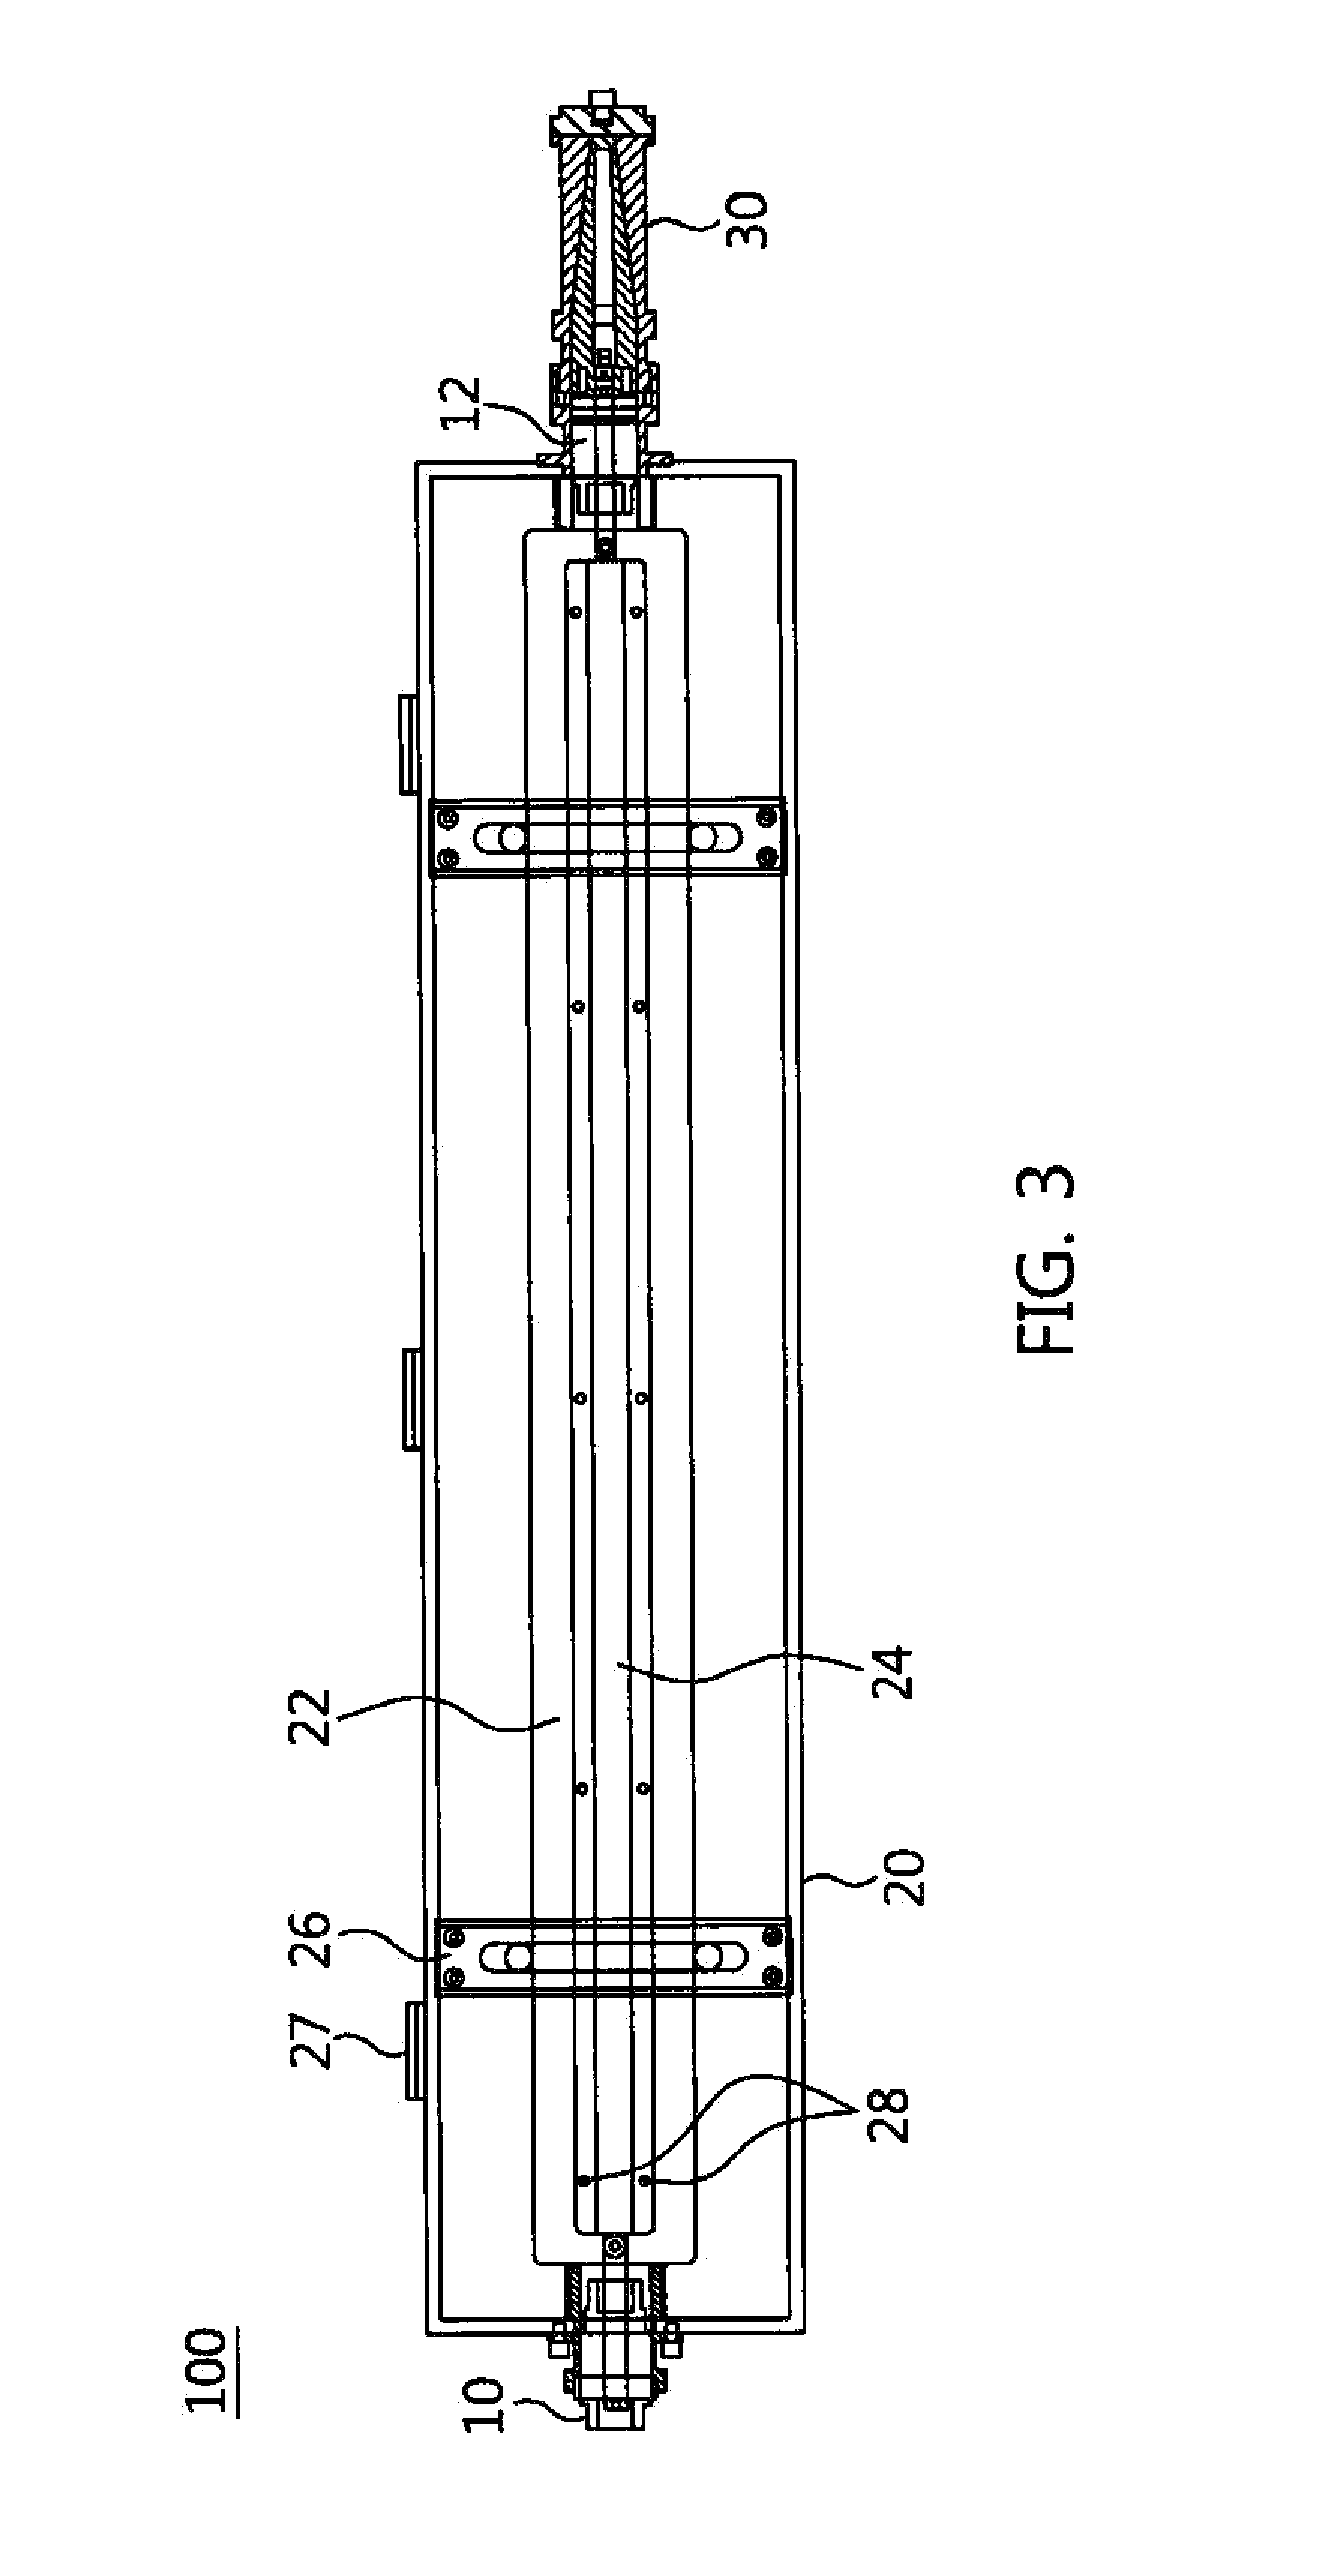 Pulse injection apparatus